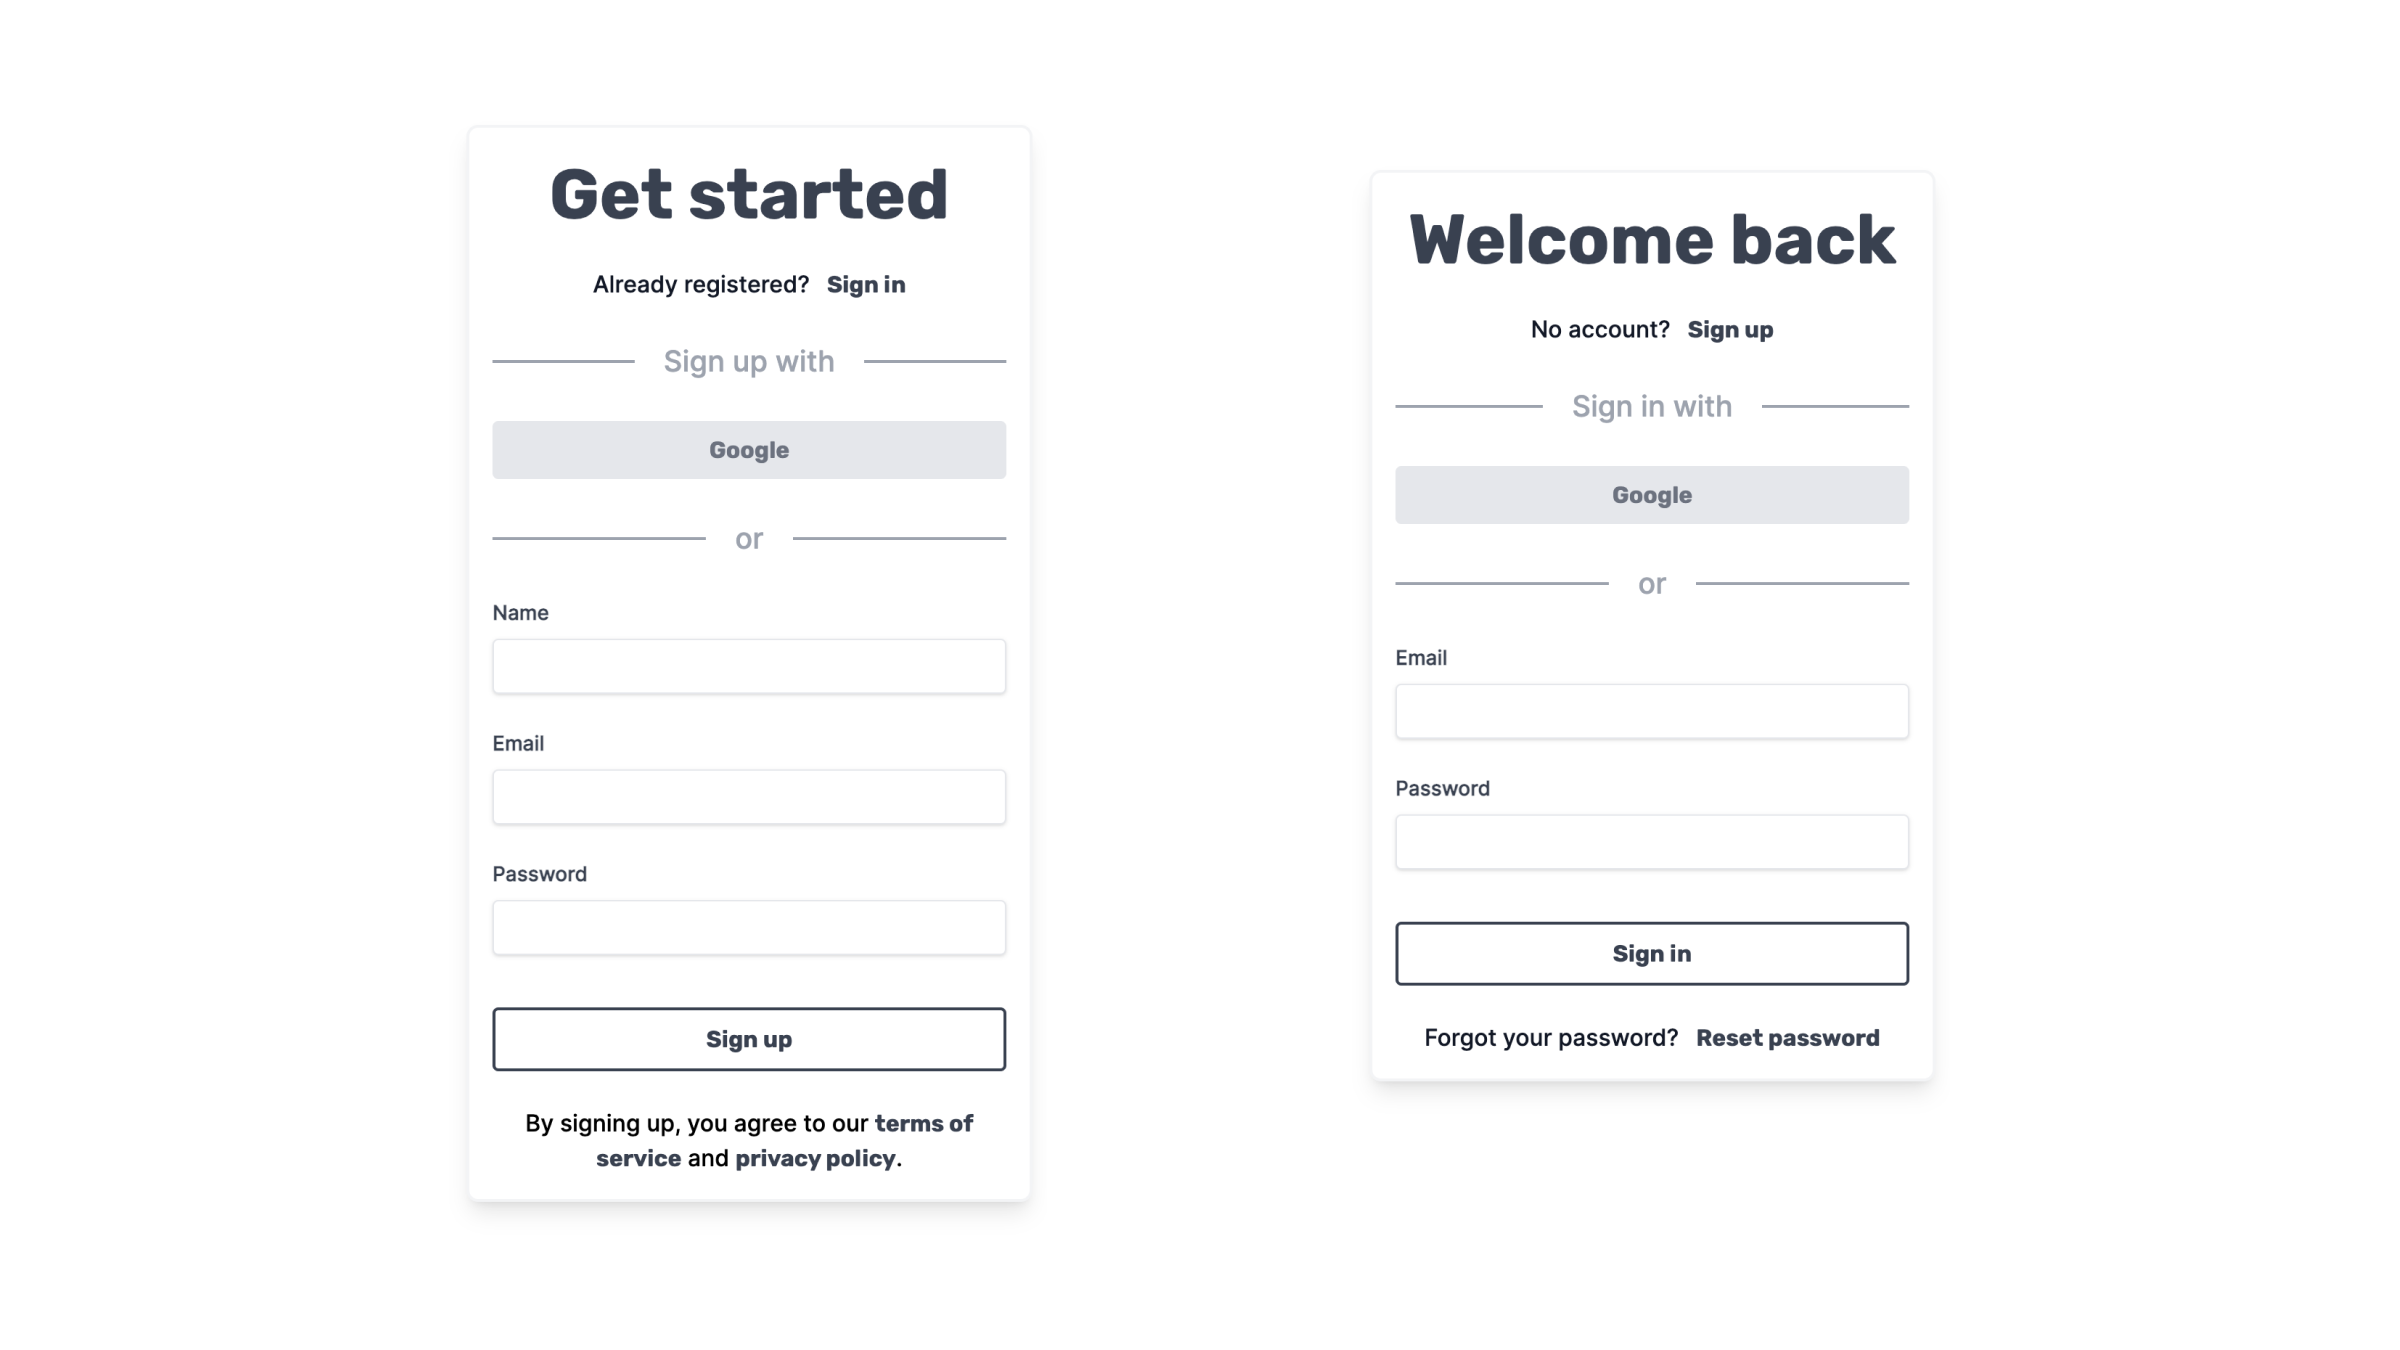 Sign-up and sign-in forms